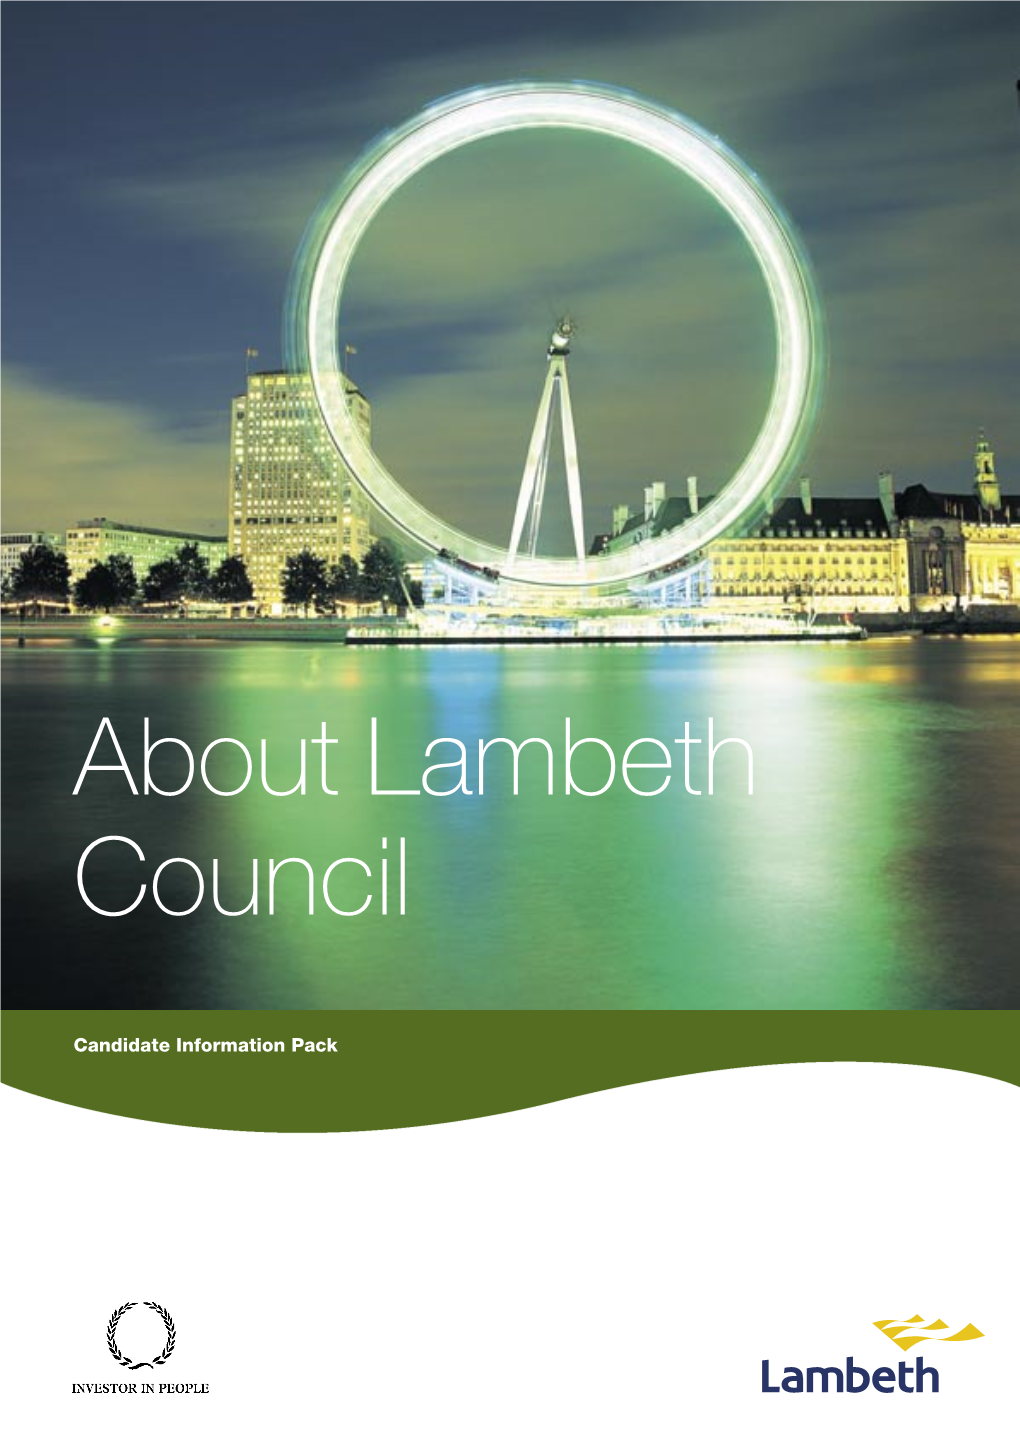 About Lambeth Council